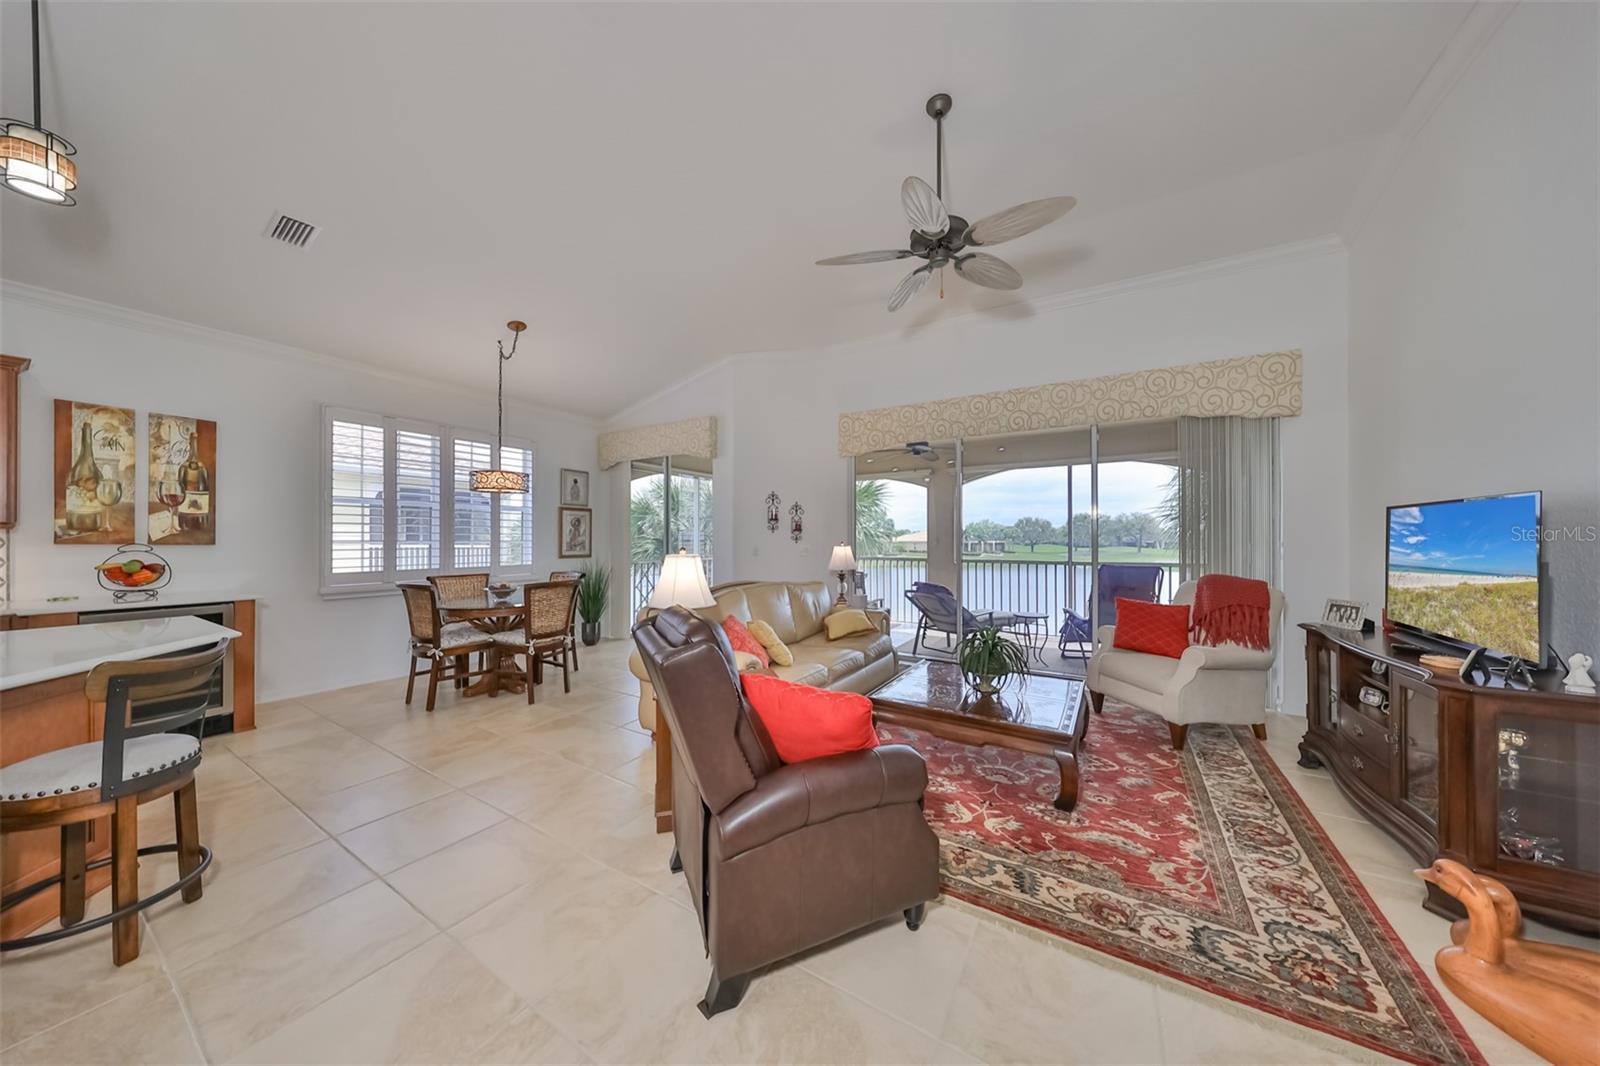 NOTICE THE WATER VIEW!  Large, beautiful living room for enjoying family and friends. This home has plenty of extra space for entertaining guests and loved ones.